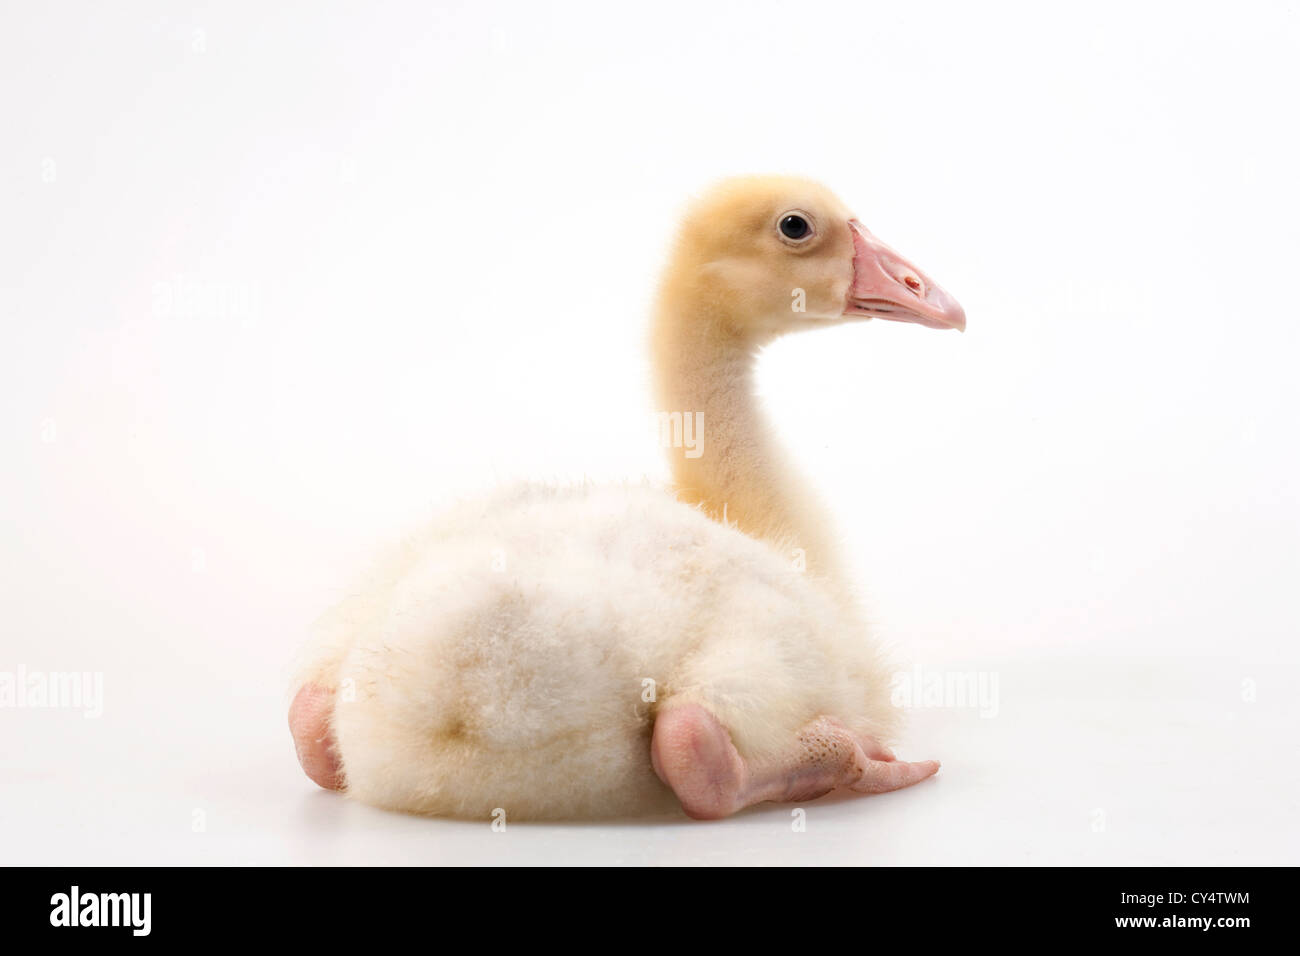 Portrait of cut duckling, rear view Stock Photo